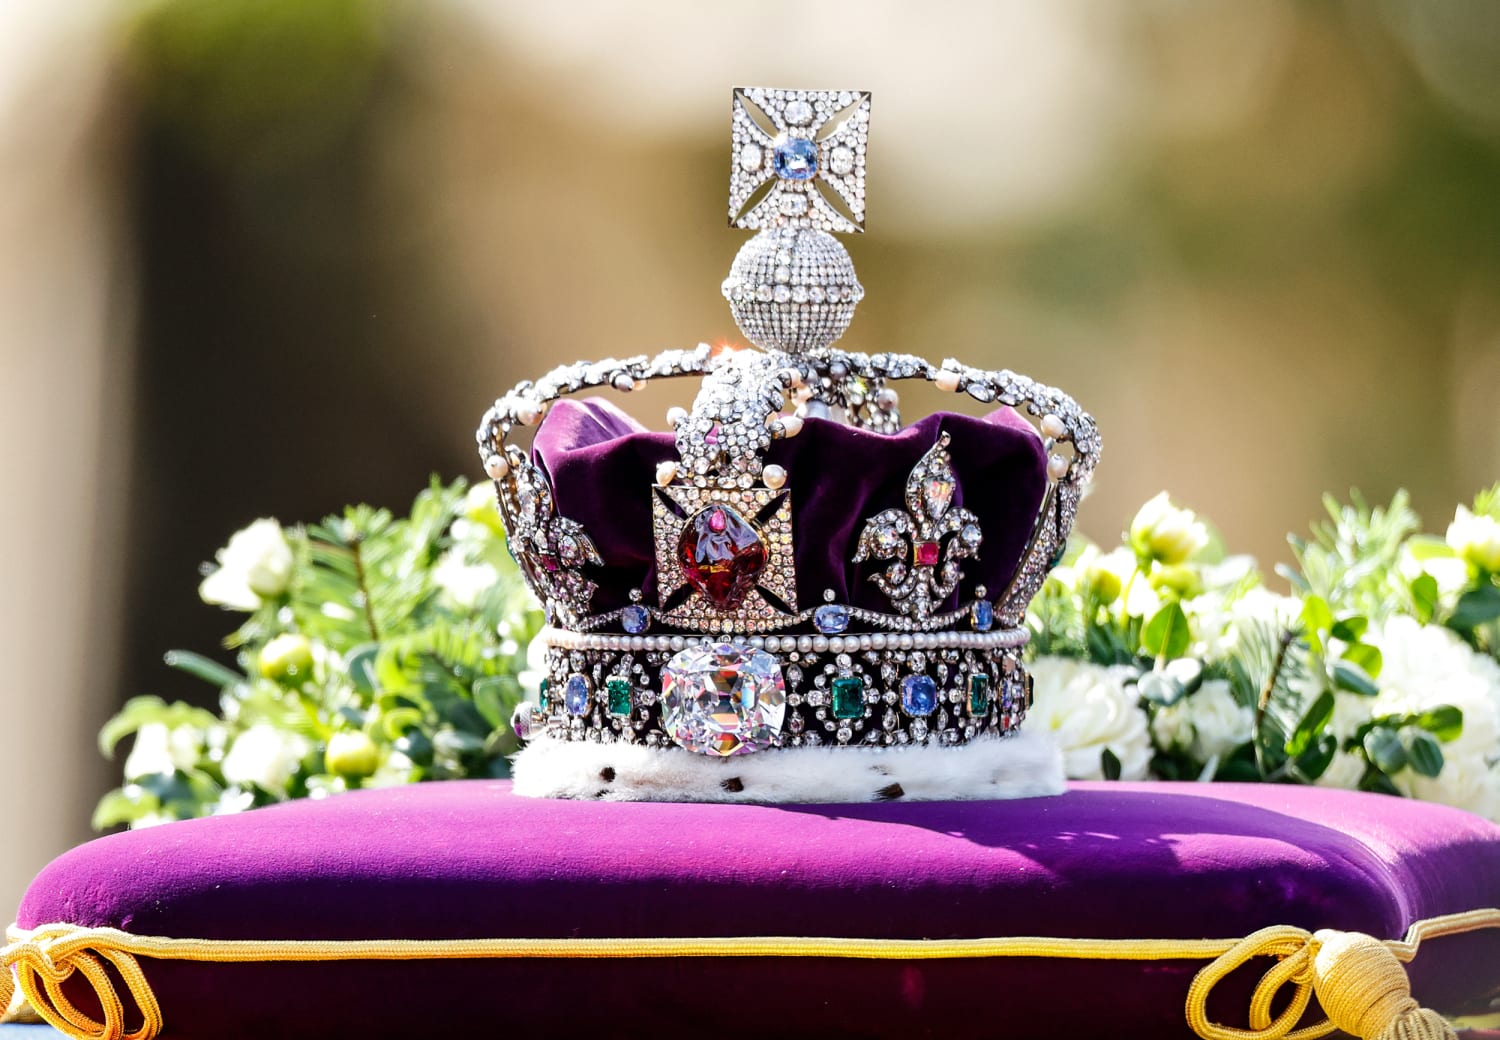 The Imperial State Crown at King Charles's Coronation: everything you need  to know